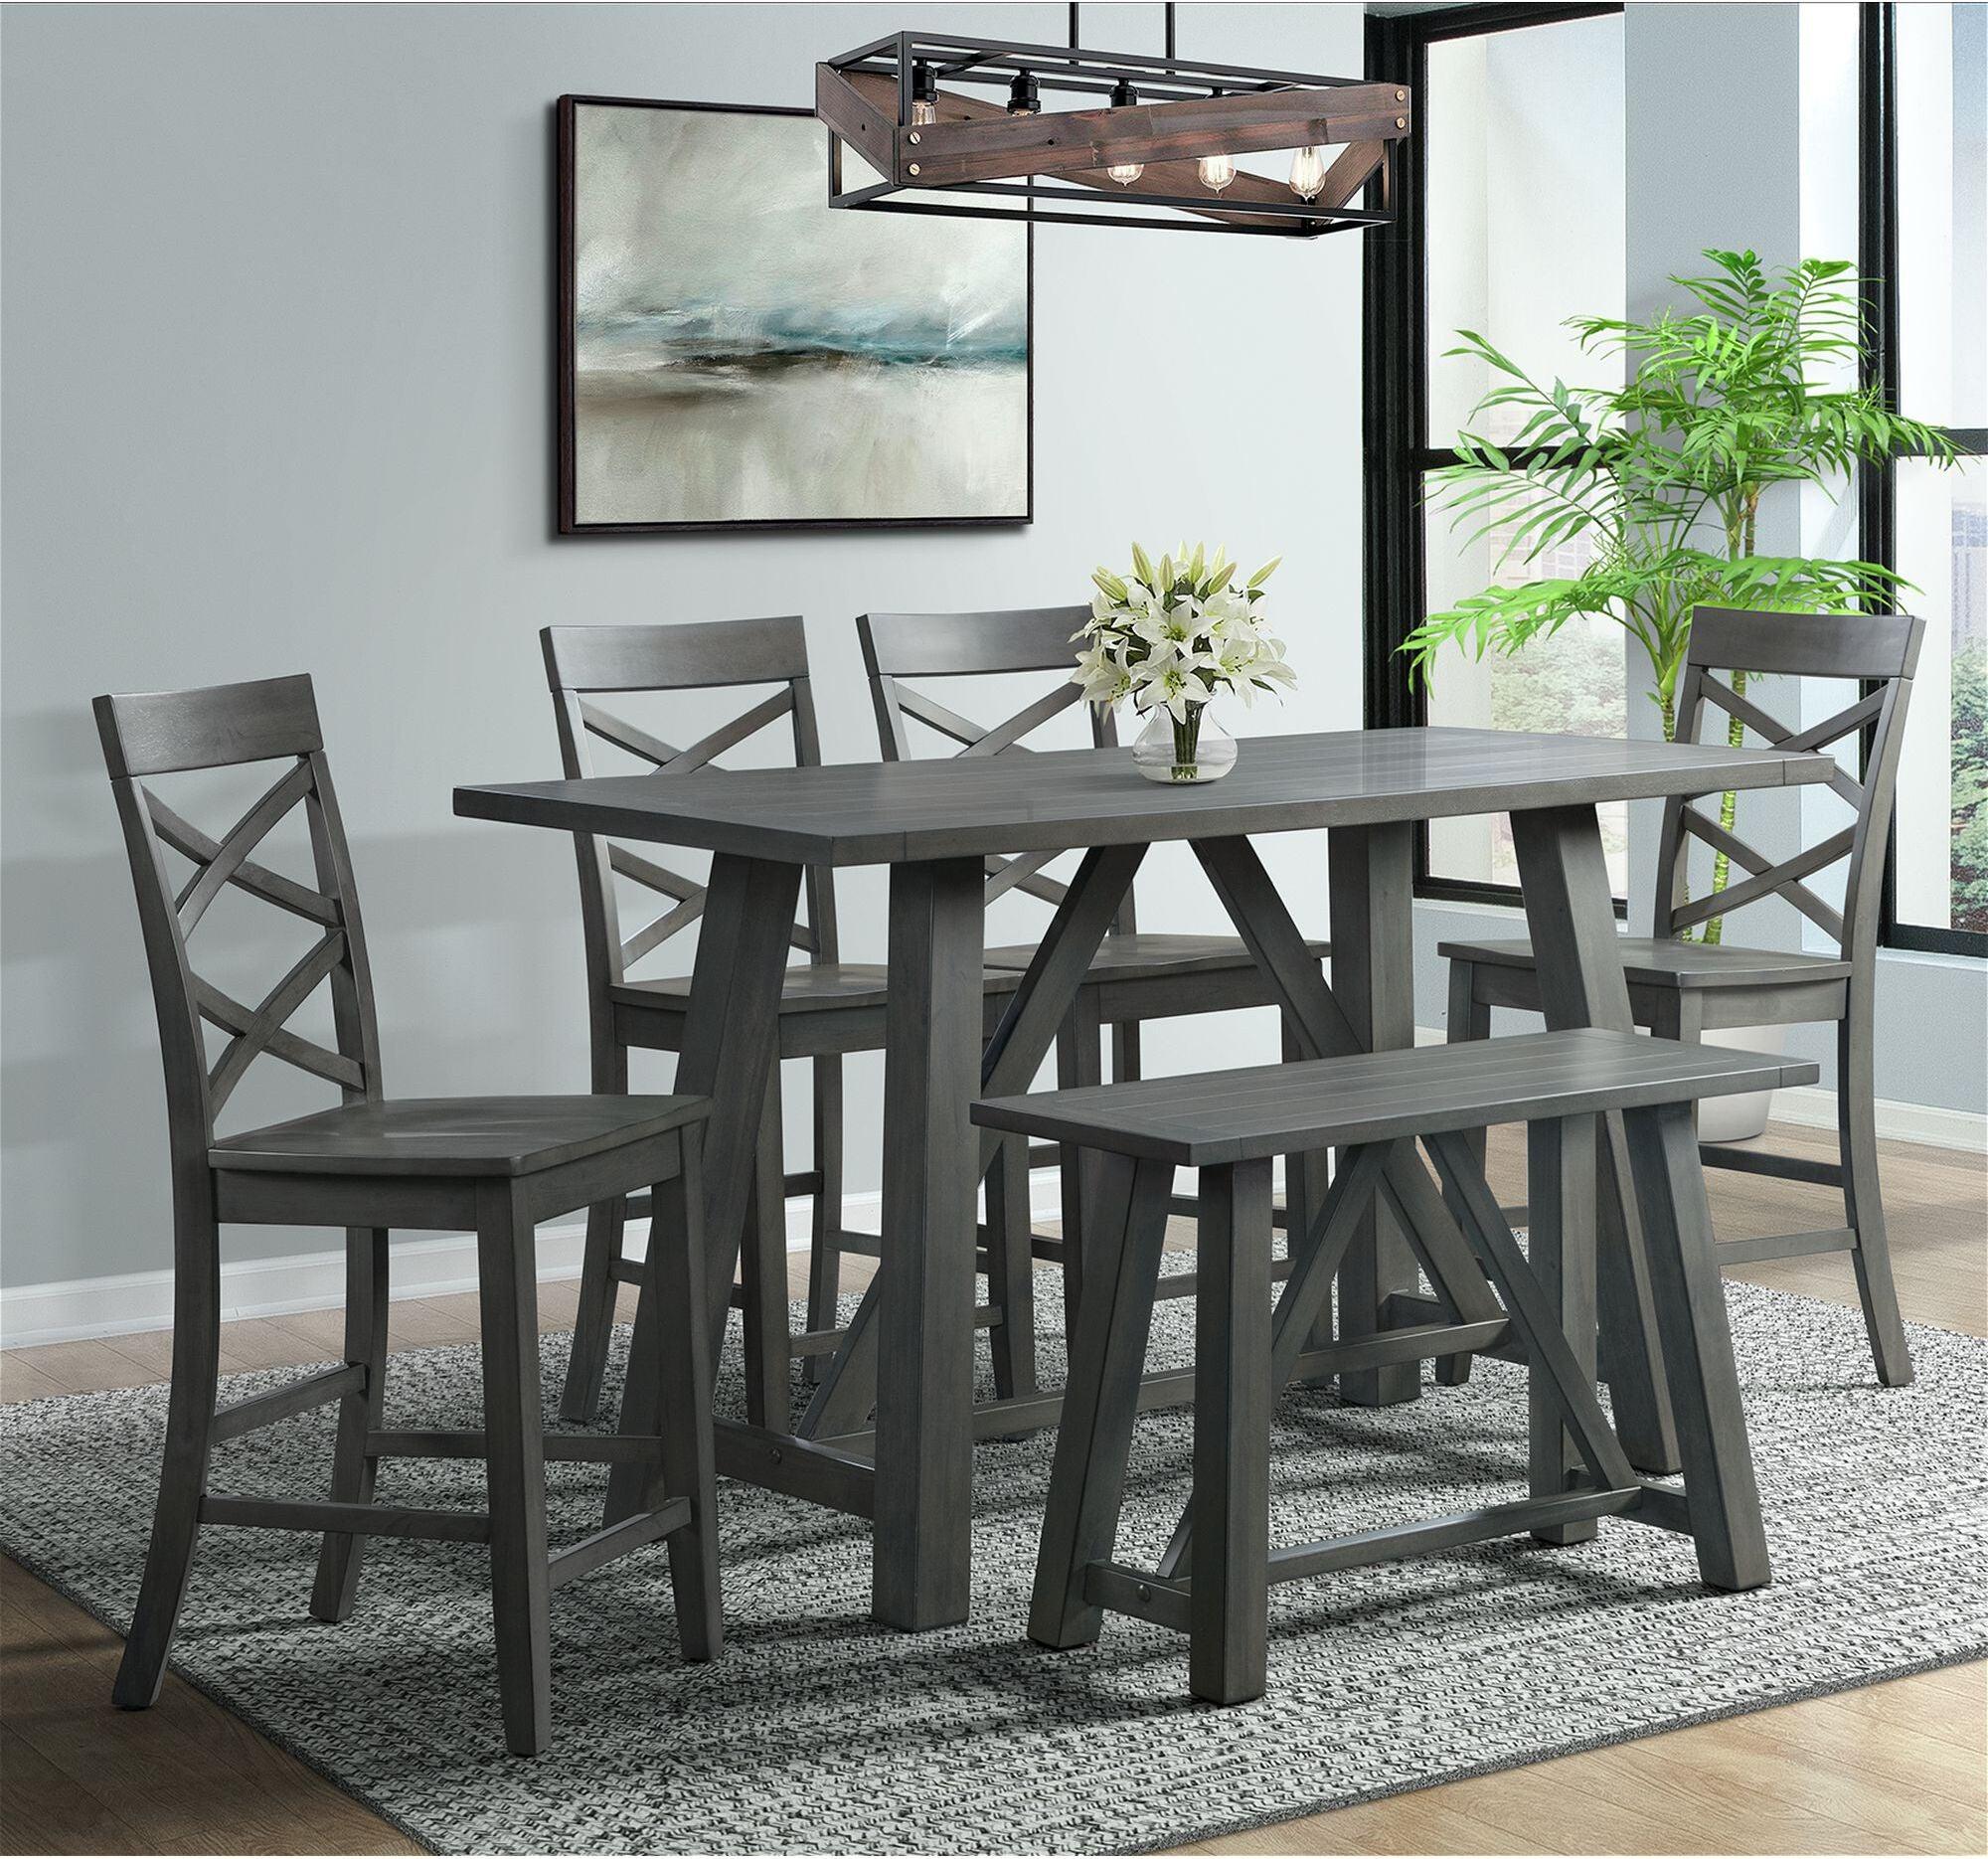 Elements Barstools - Regan Counter Side Chair Set in Gray